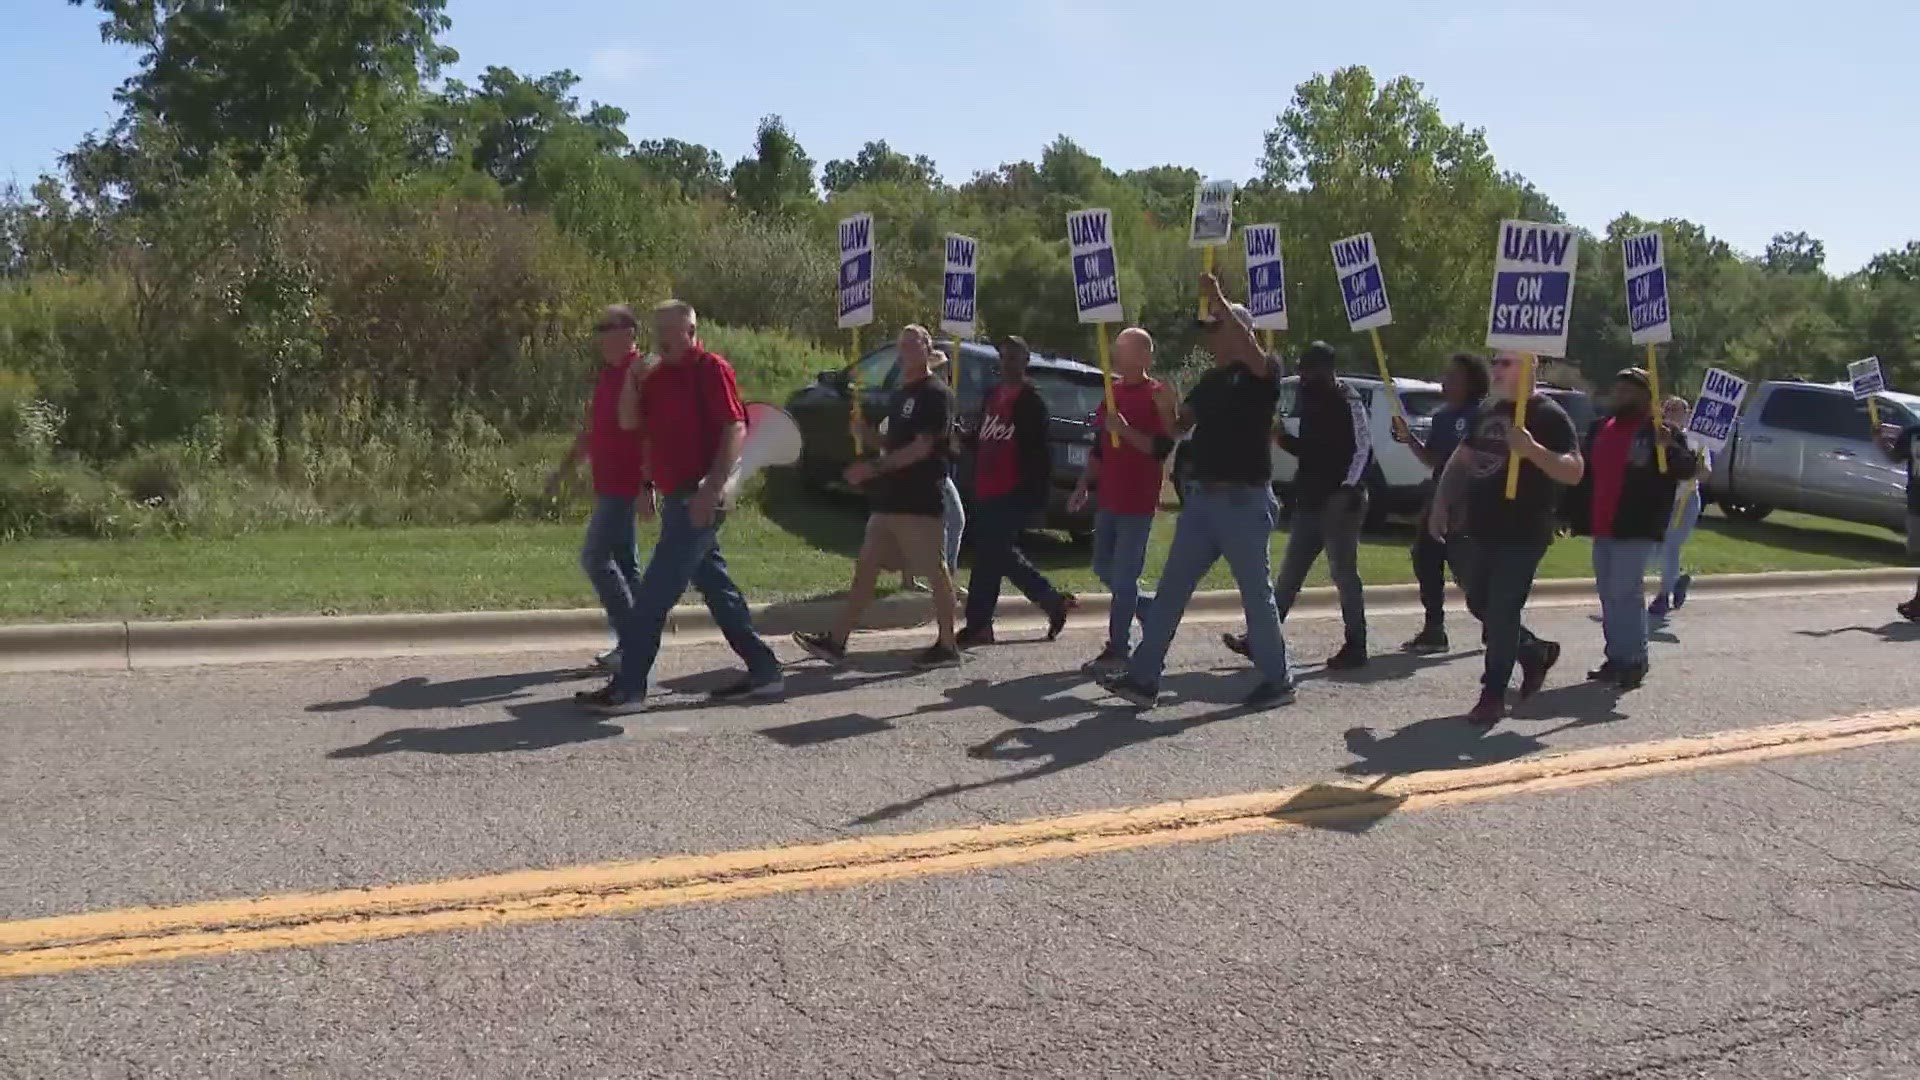 UAW President Shawn Fain announced Friday morning that workers would strike at Stellantis and GM parts and distribution facilities.